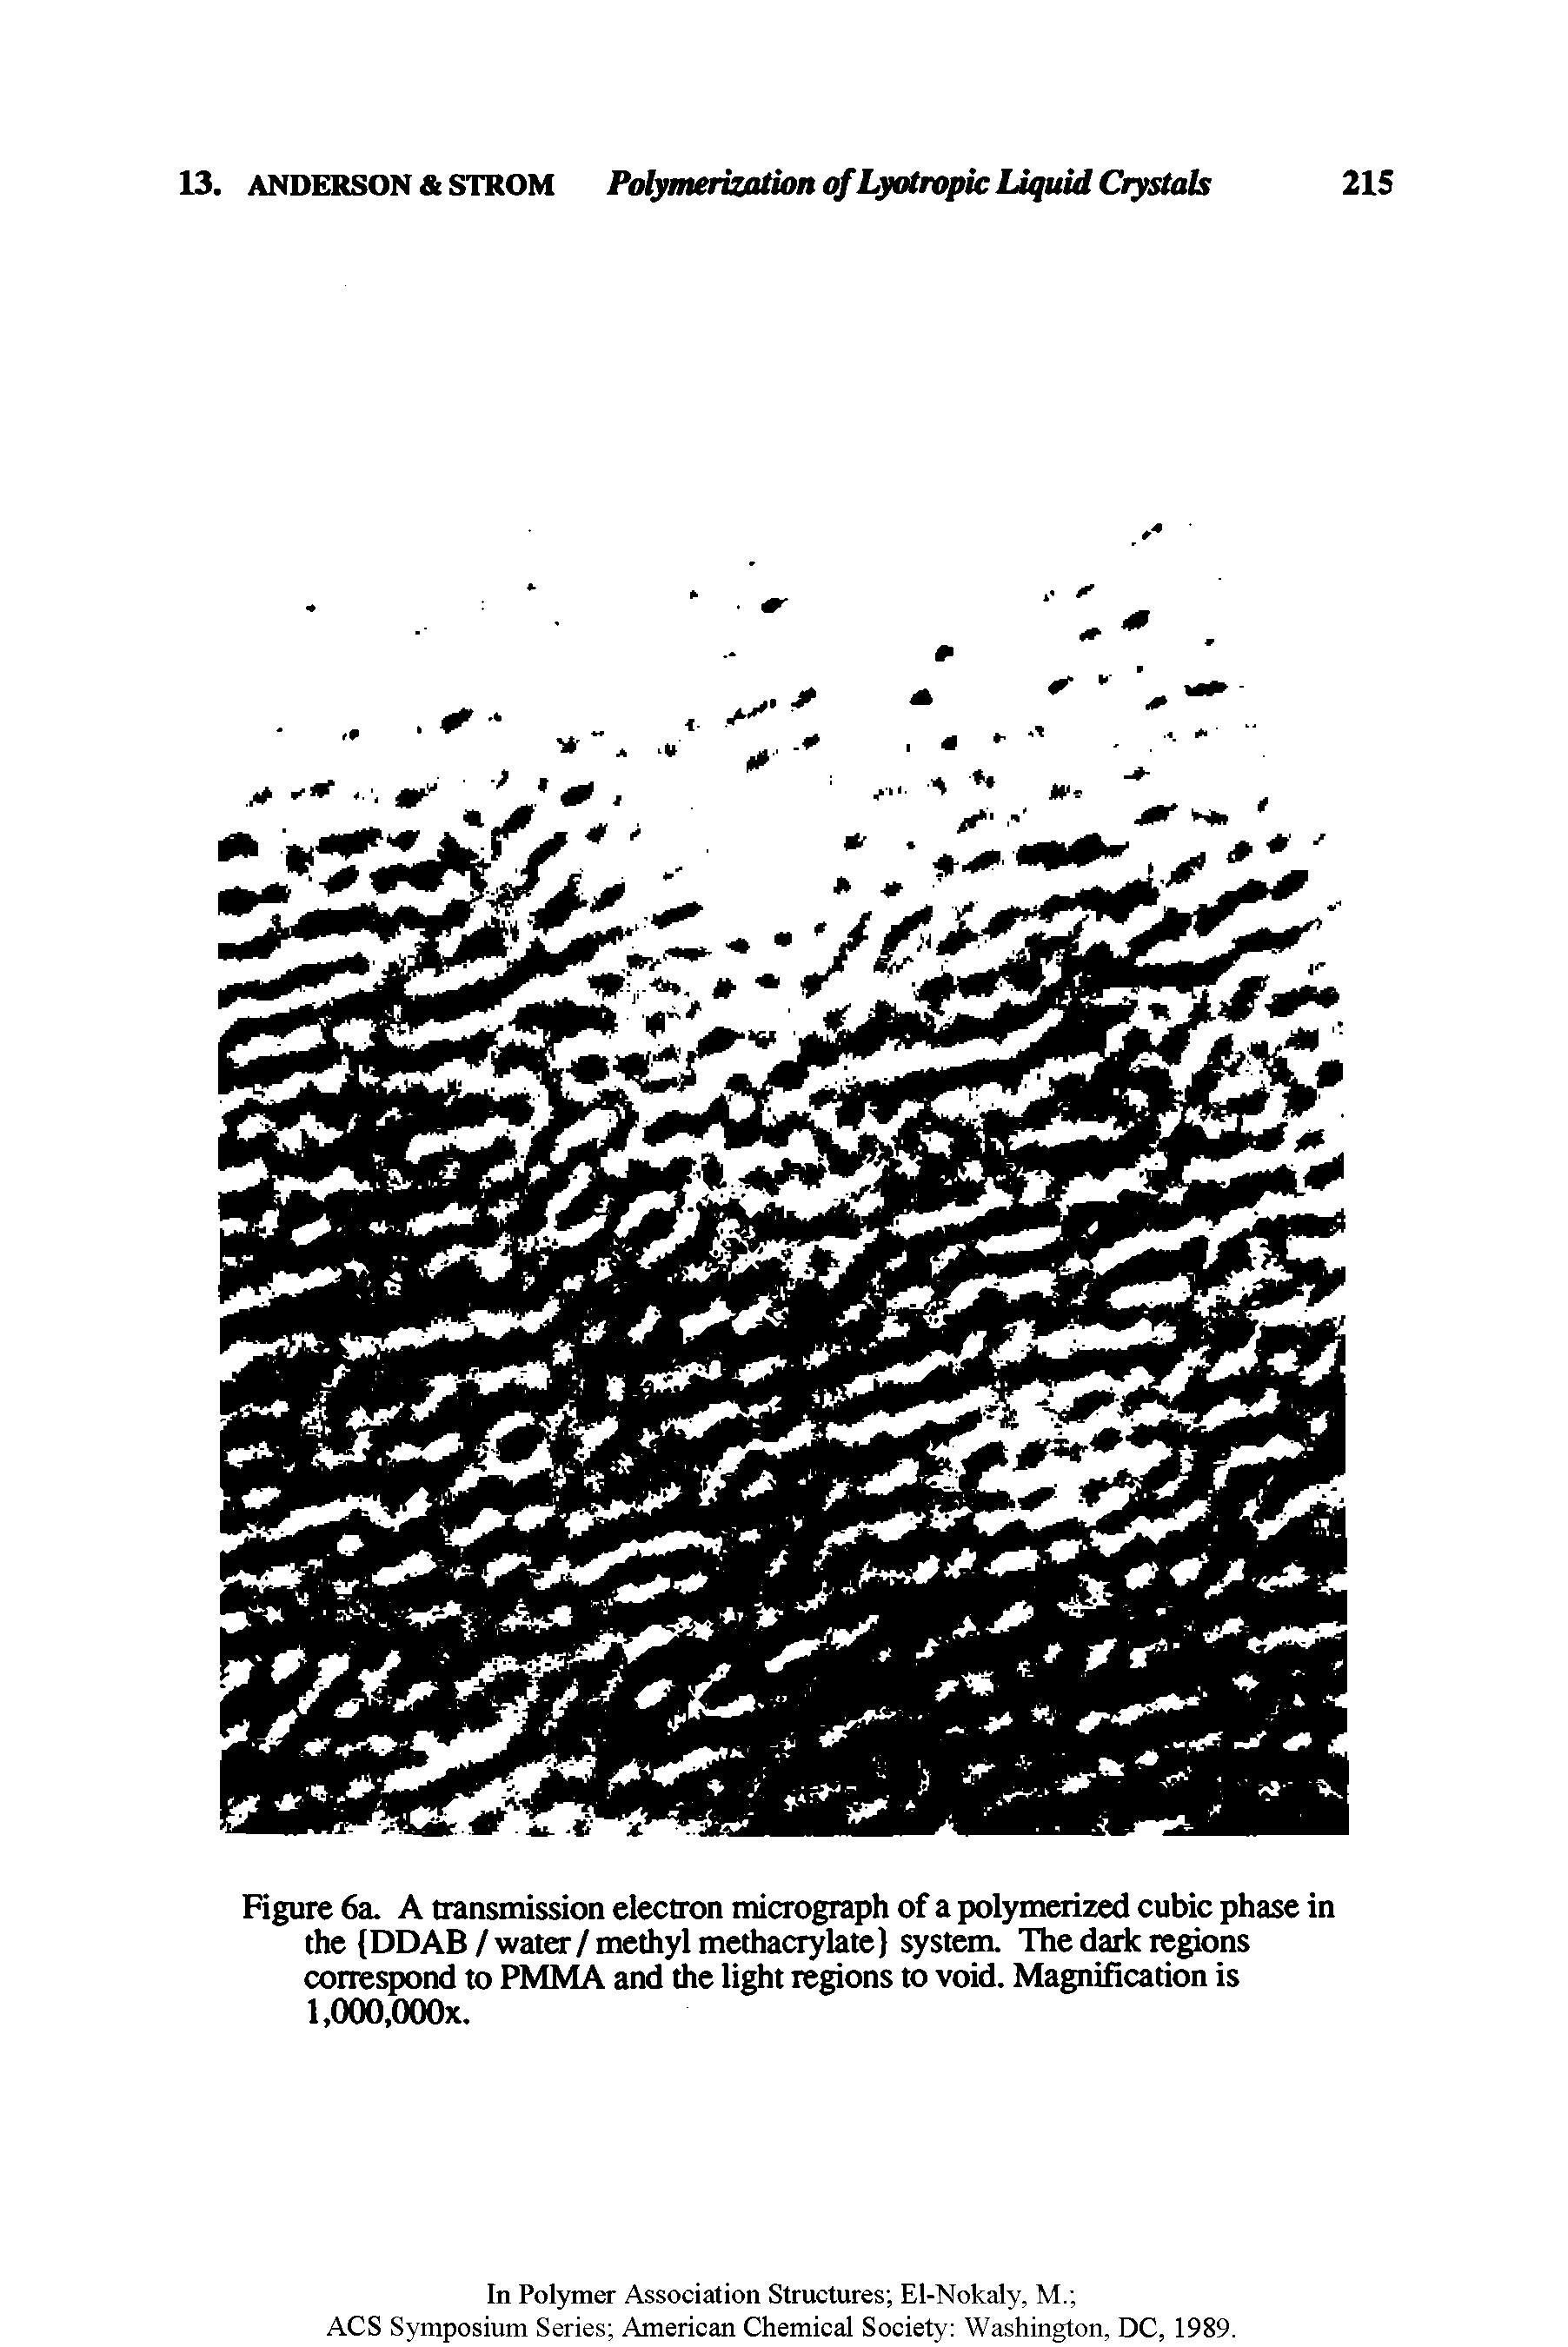 Figure 6a. A transmission electron micrograph of a polymerized cubic phase in the DDAB/water/methyl methacrylate) system. The dark regions correspond to PMMA and the light regions to void. Magnification is l.OOO.OOOx.